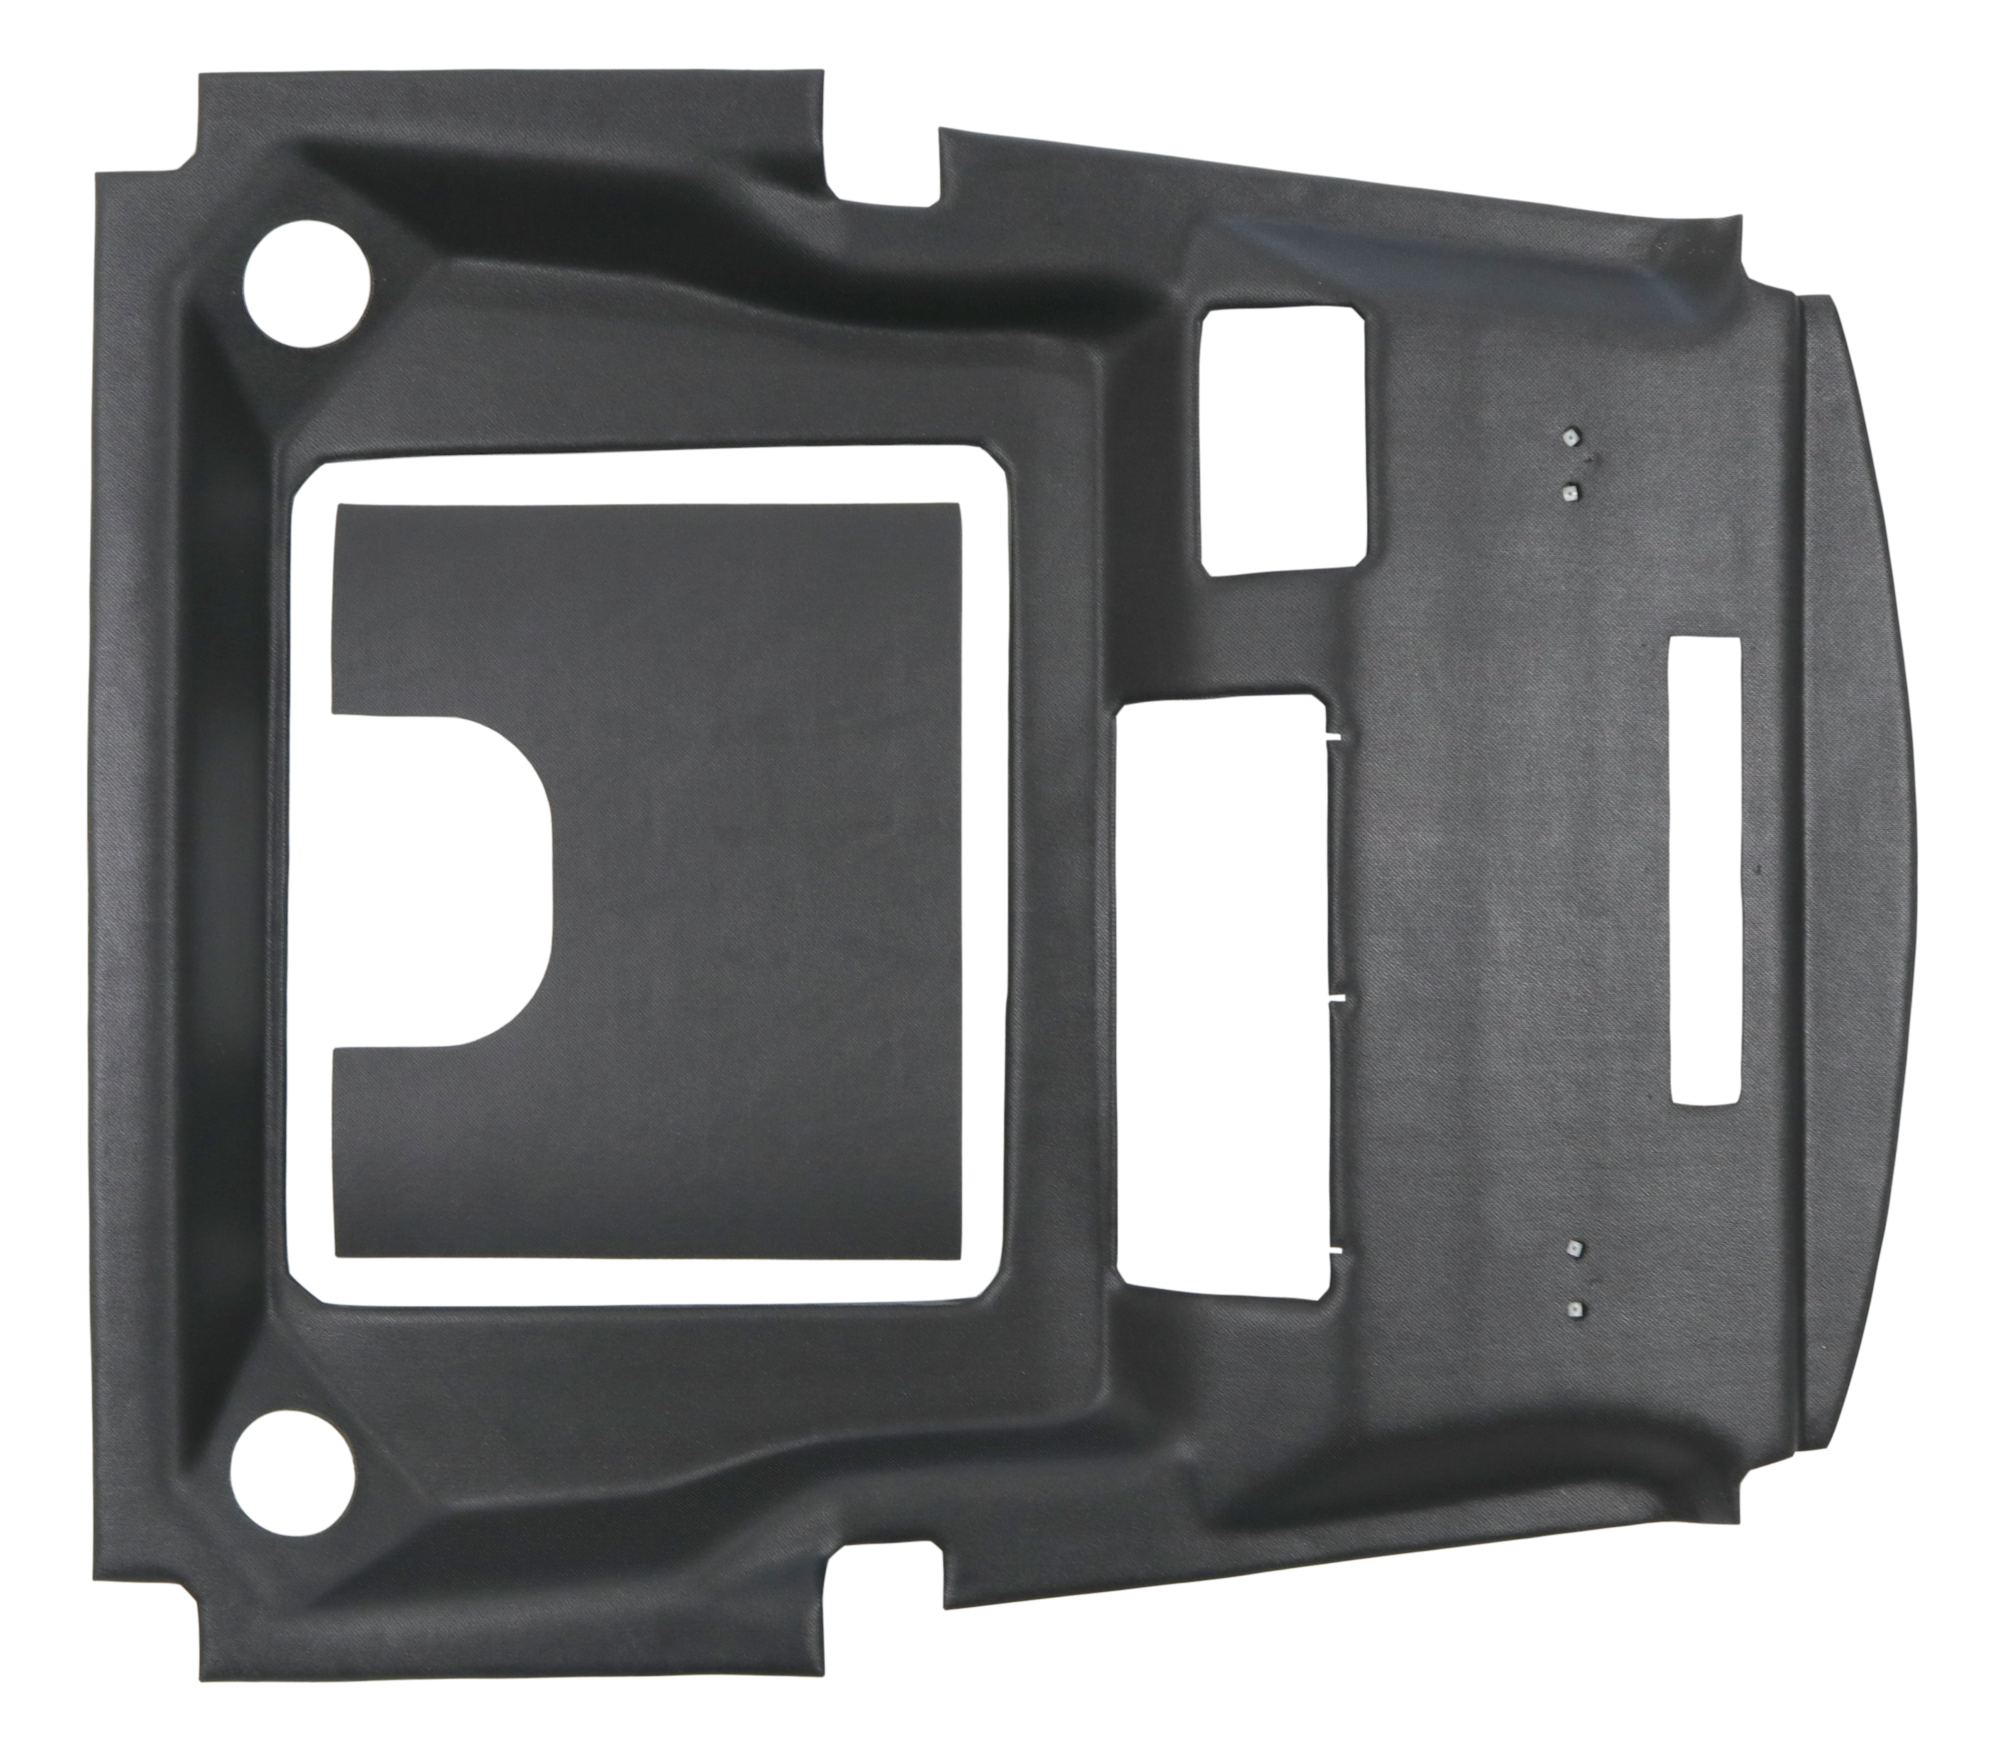 Is this product similar to the original cab liner which had a thin layer of foam underneath the cloth and is it a compatible with a 1992 ford 8210 Super Q cab?